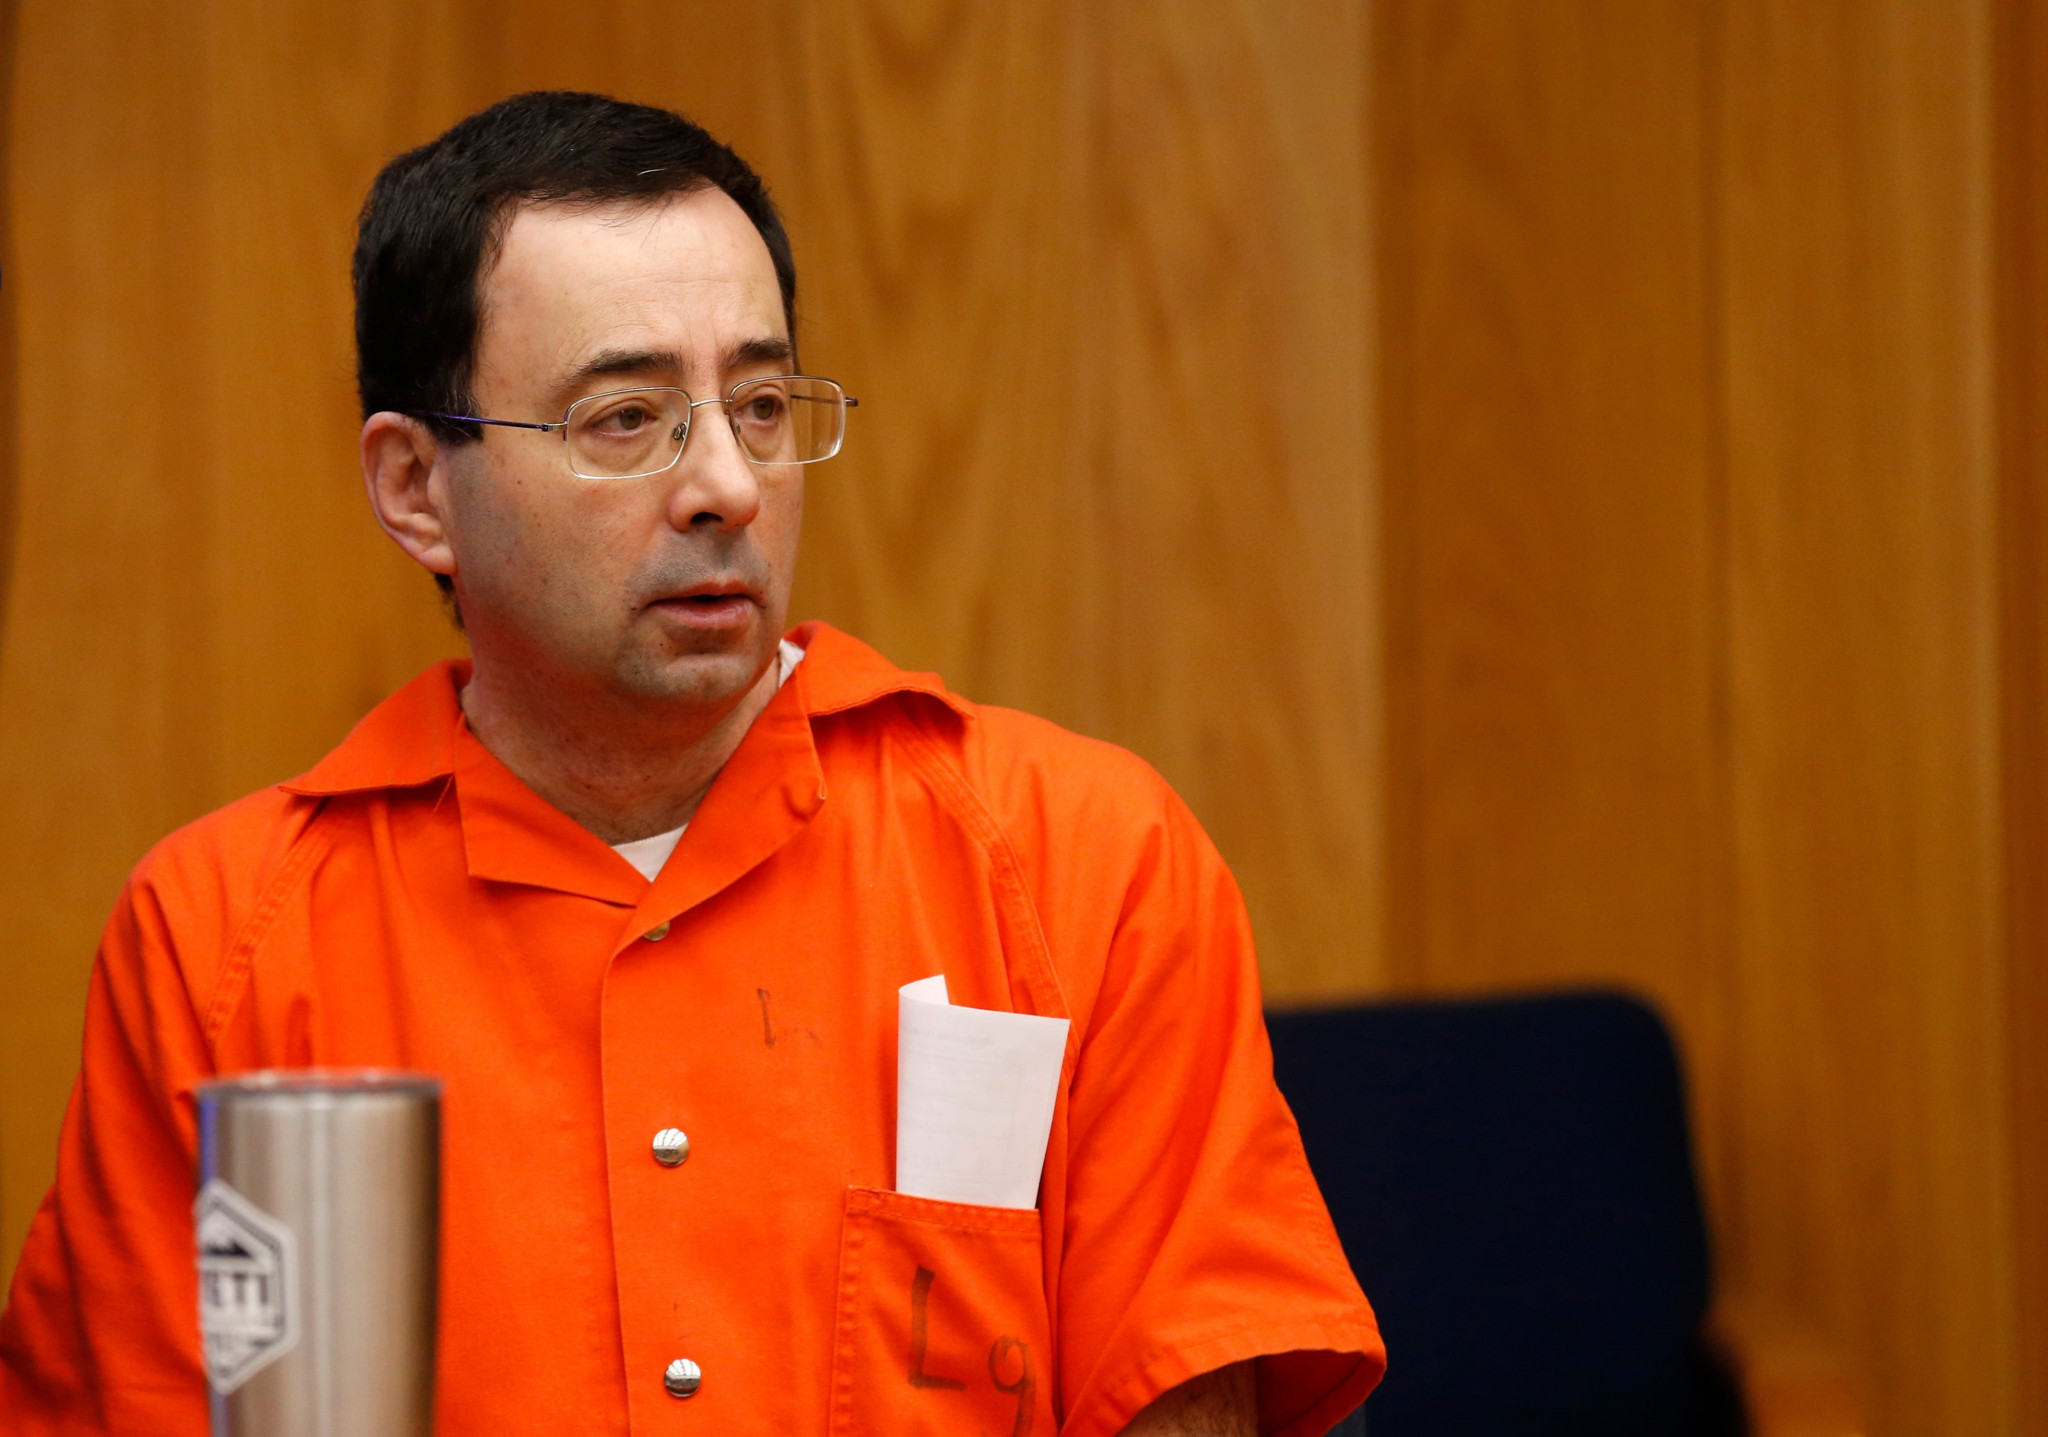 A father whose three daughters were abused by former USA Gymnastics team doctor Larry Nassar has attempted to attack him ©Getty Images